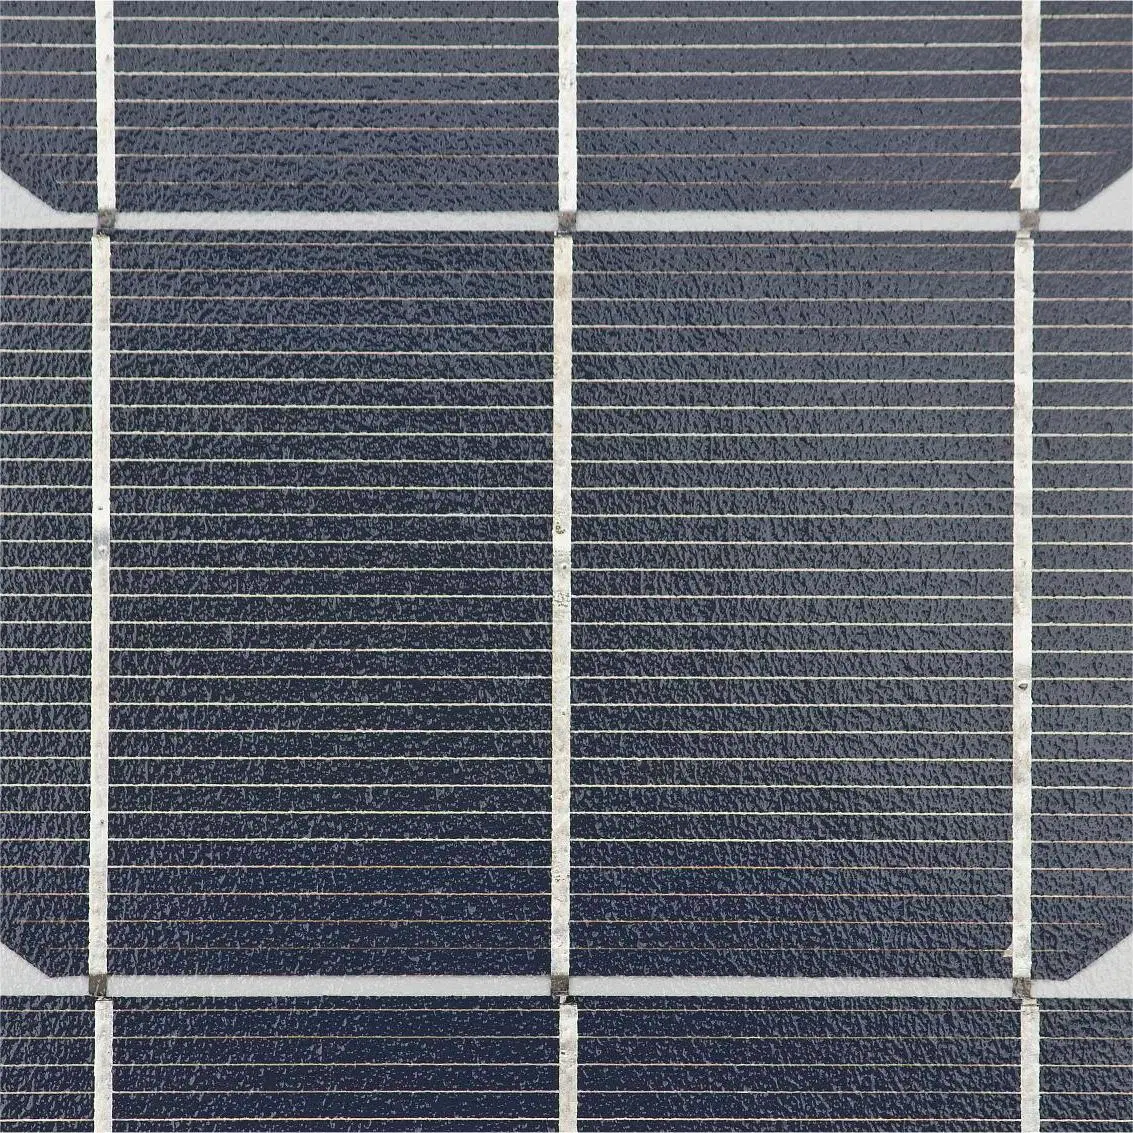 Horay PV Module HS550-Mho-D 550W Monocrystalline BIPV Solar-Panel Chinese Solar Energy Suppliers Solar Roof Tiles Price Used